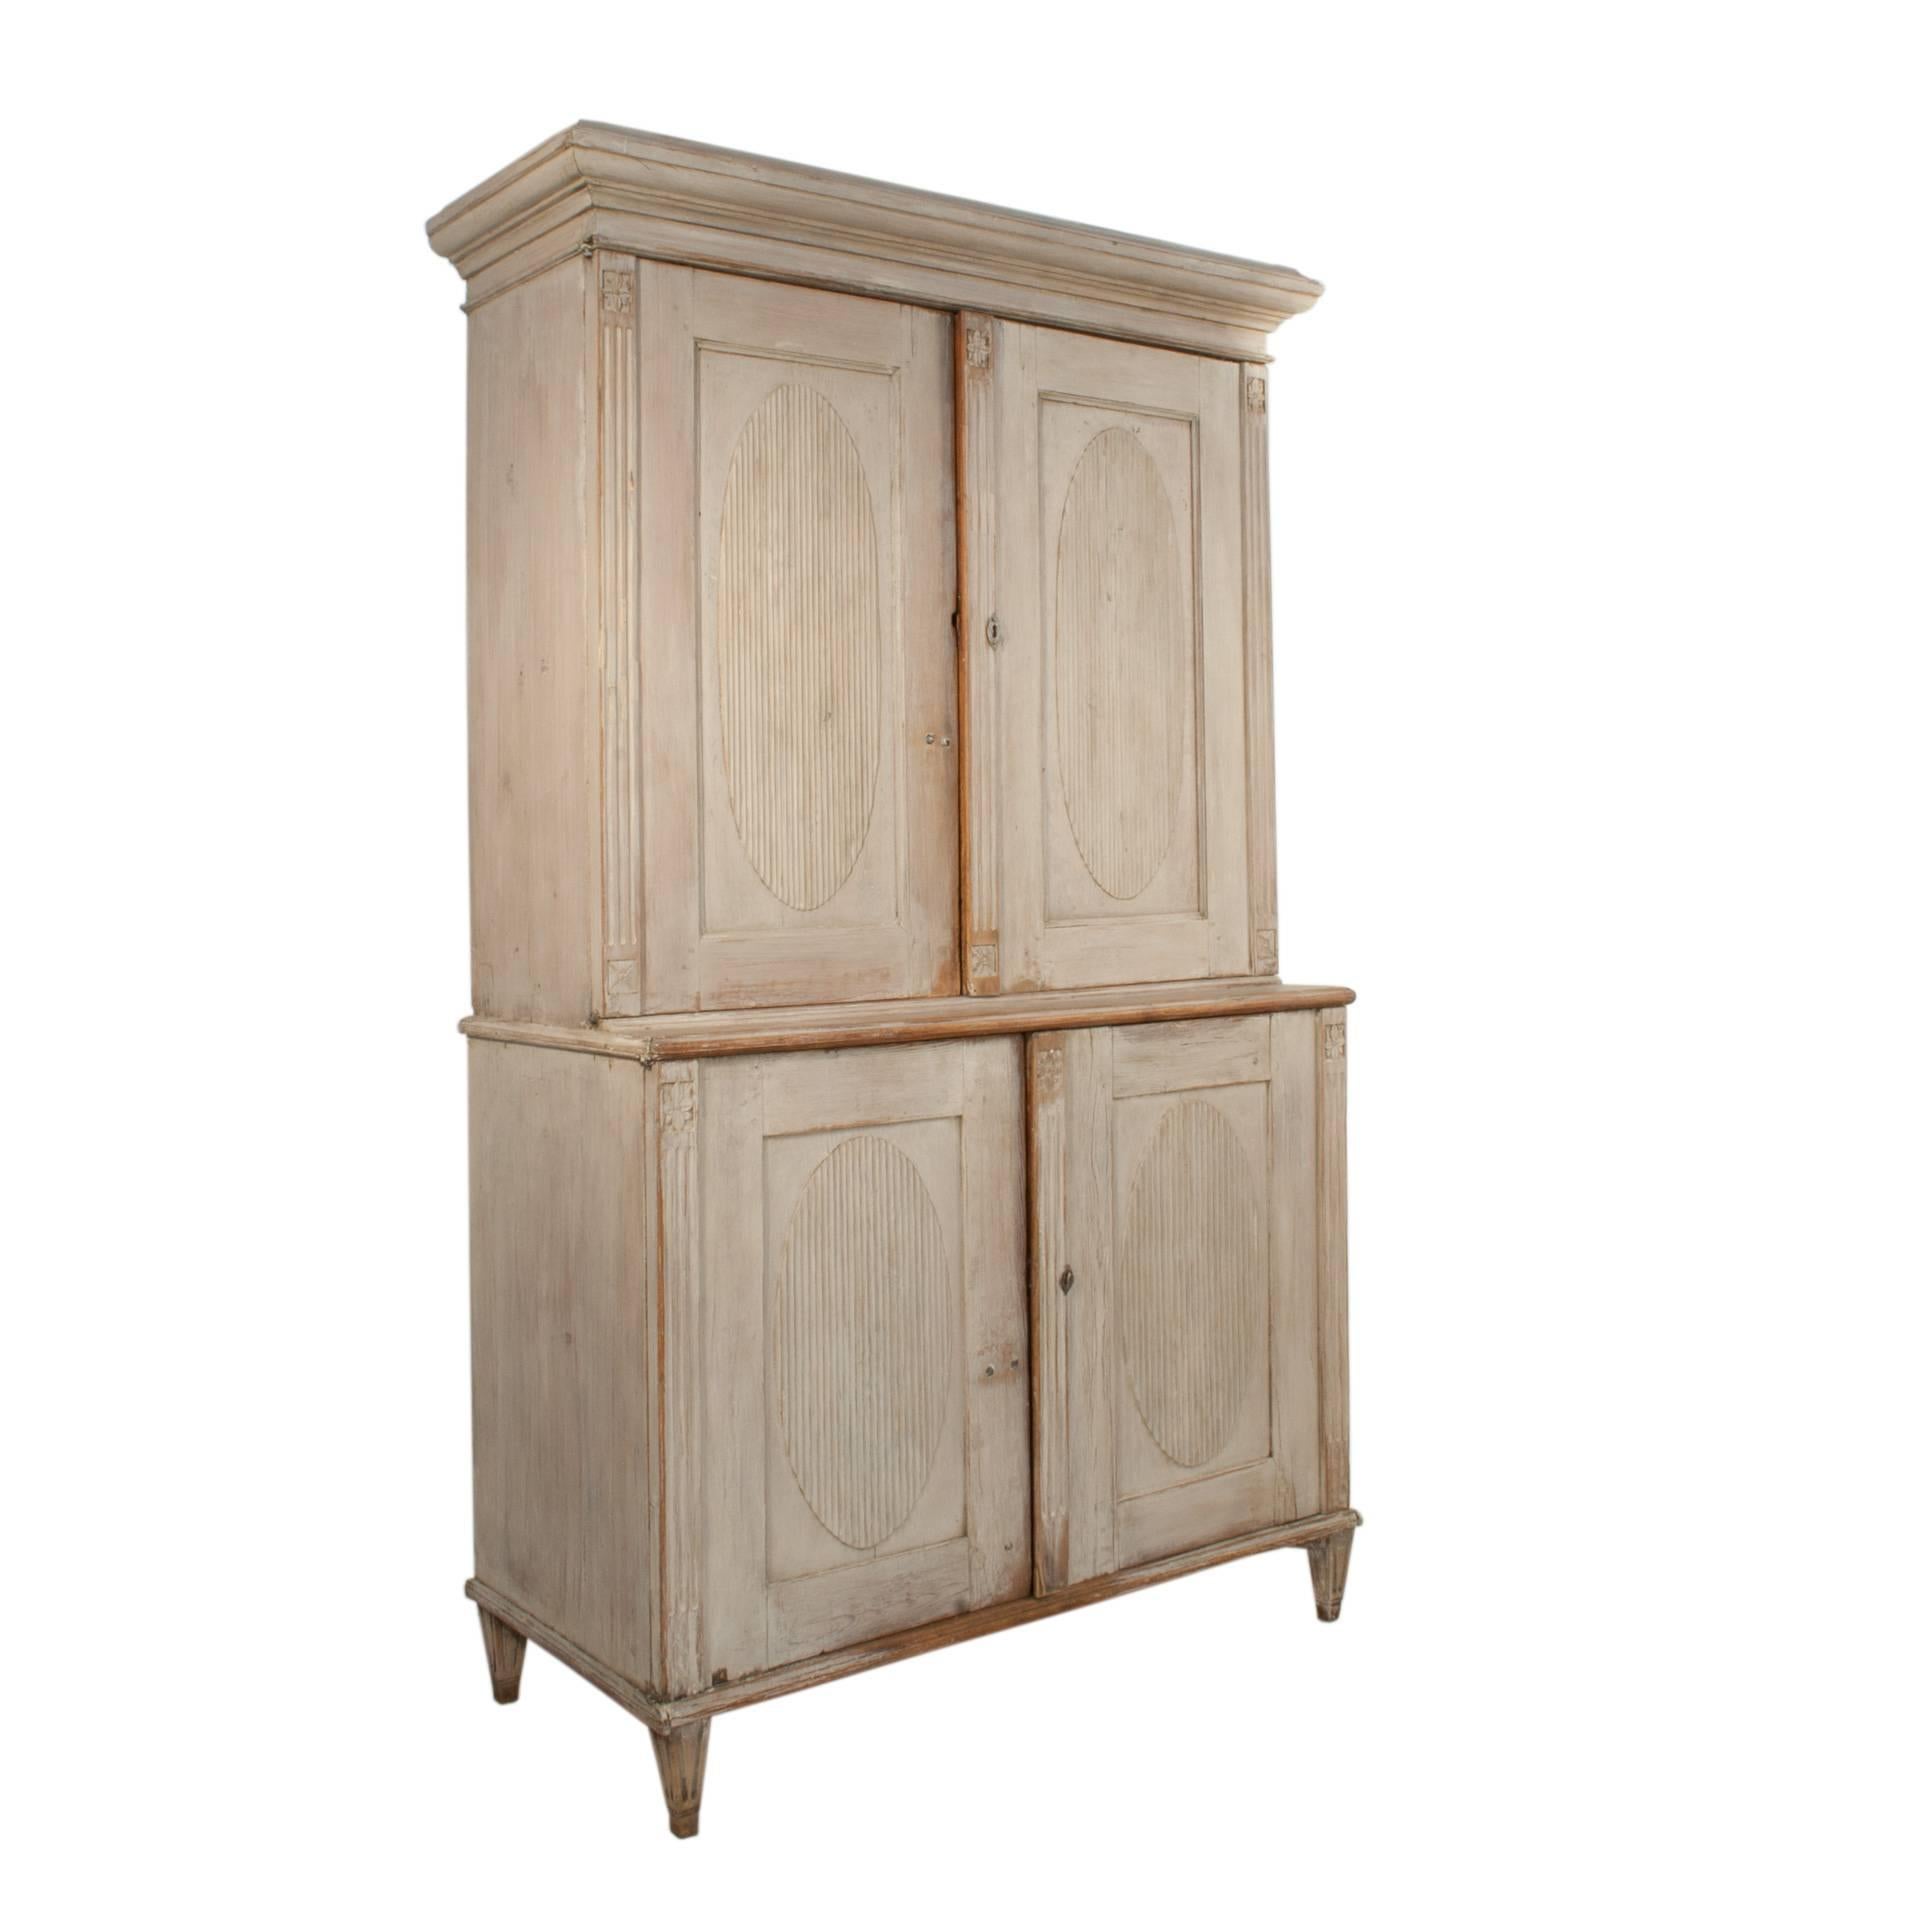 Gustavian cabinet with four doors in a worn pale grey patina.